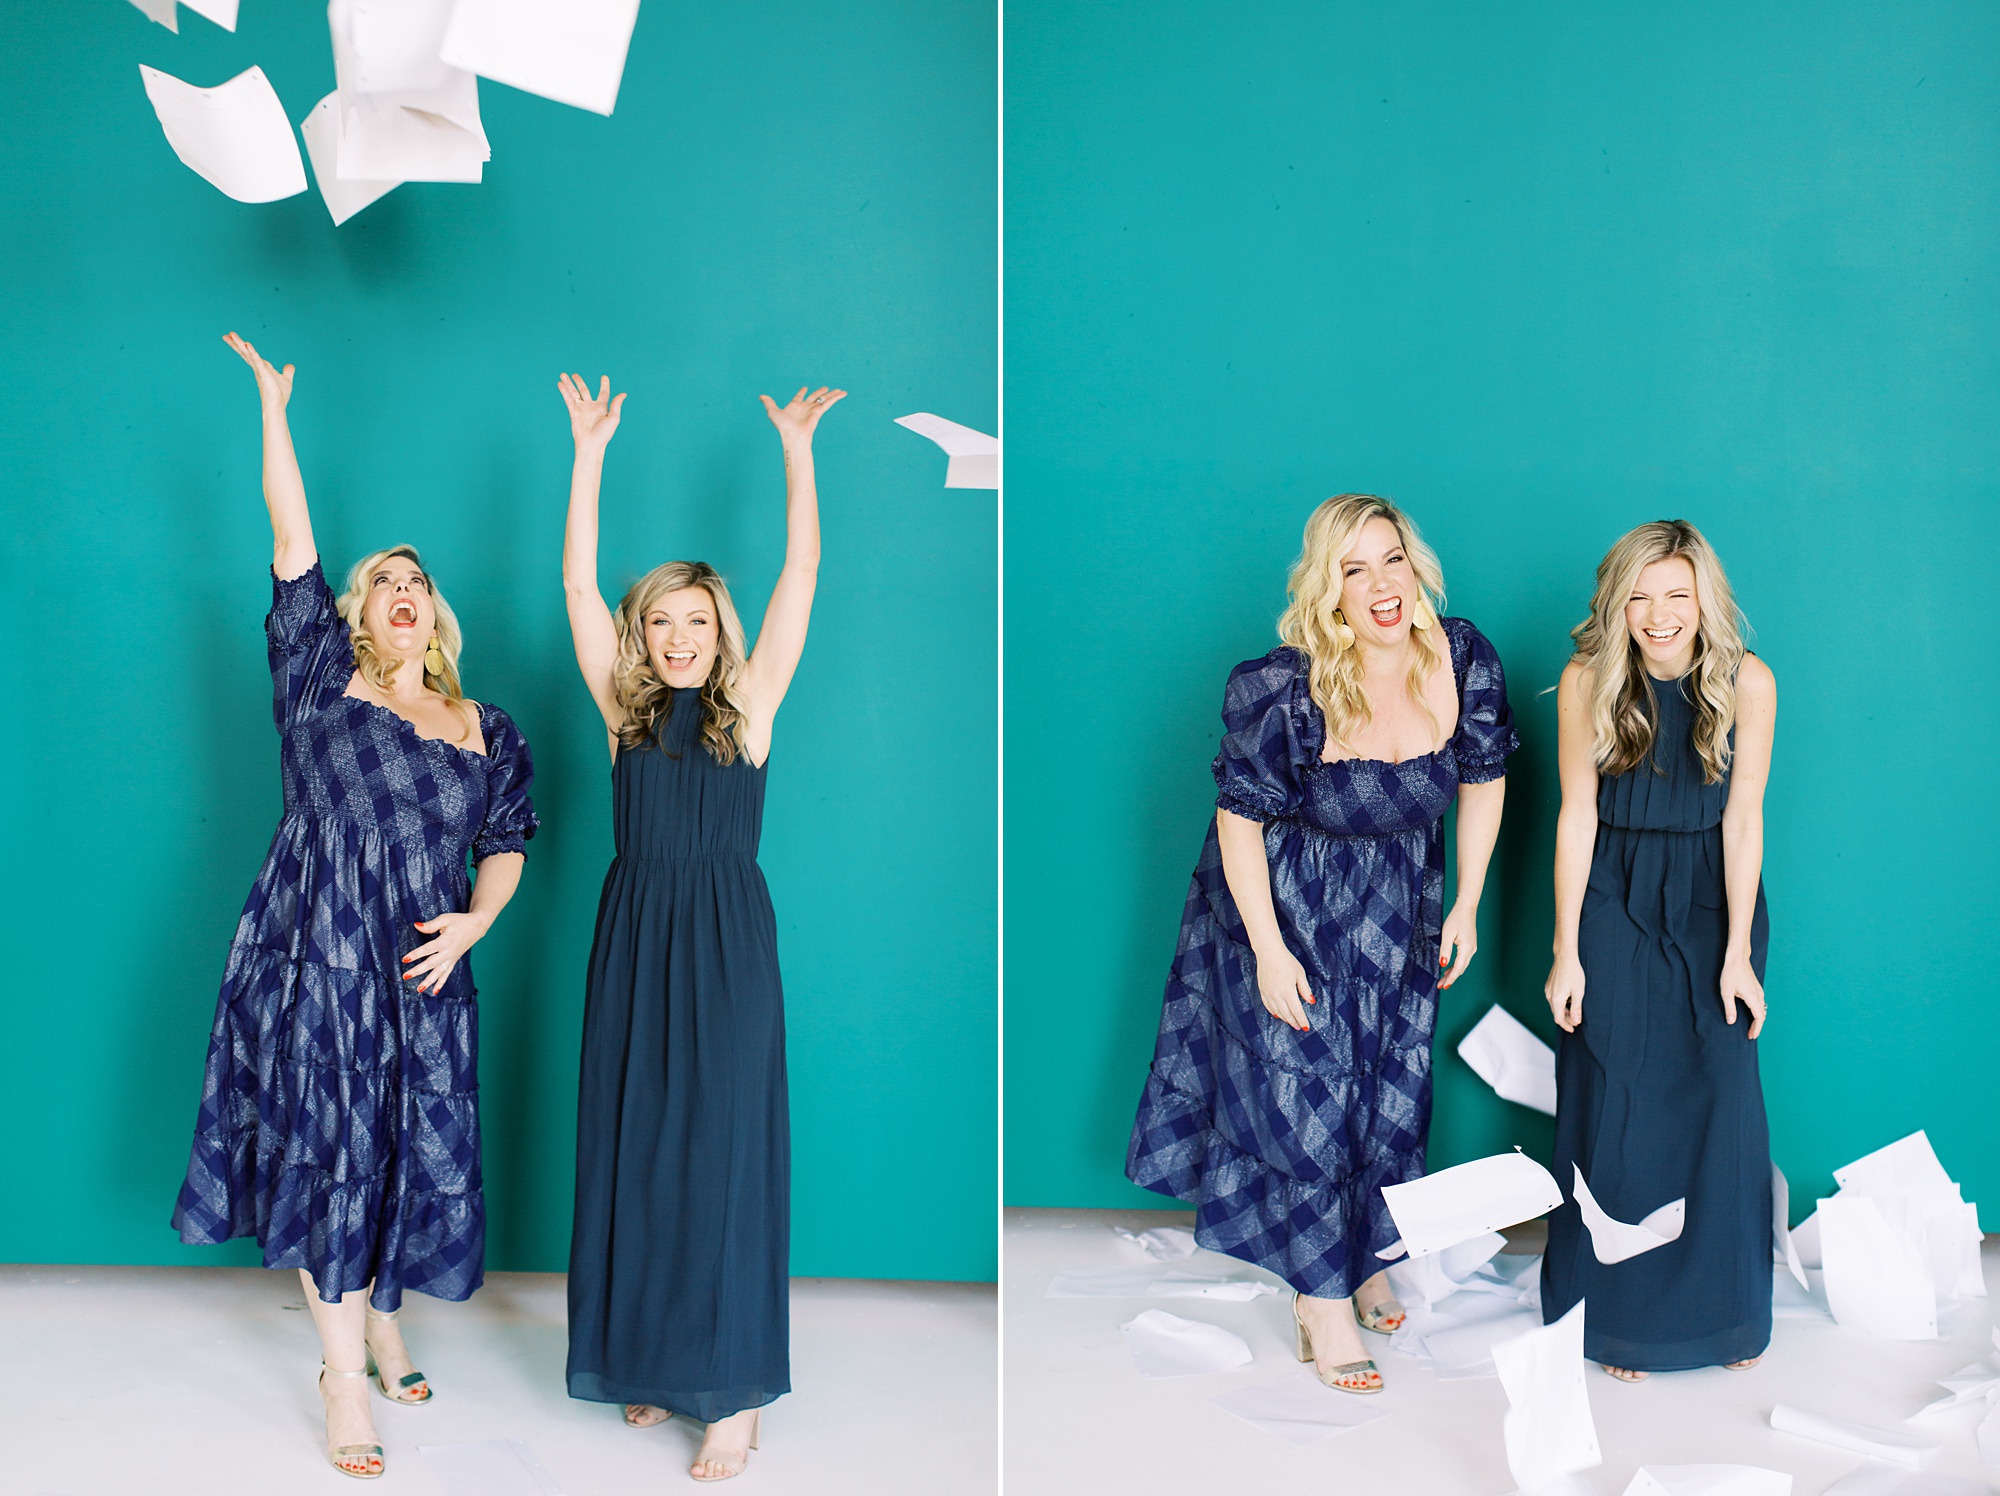 wedding planners at McLean Events toss papers up in air in front of teal wall